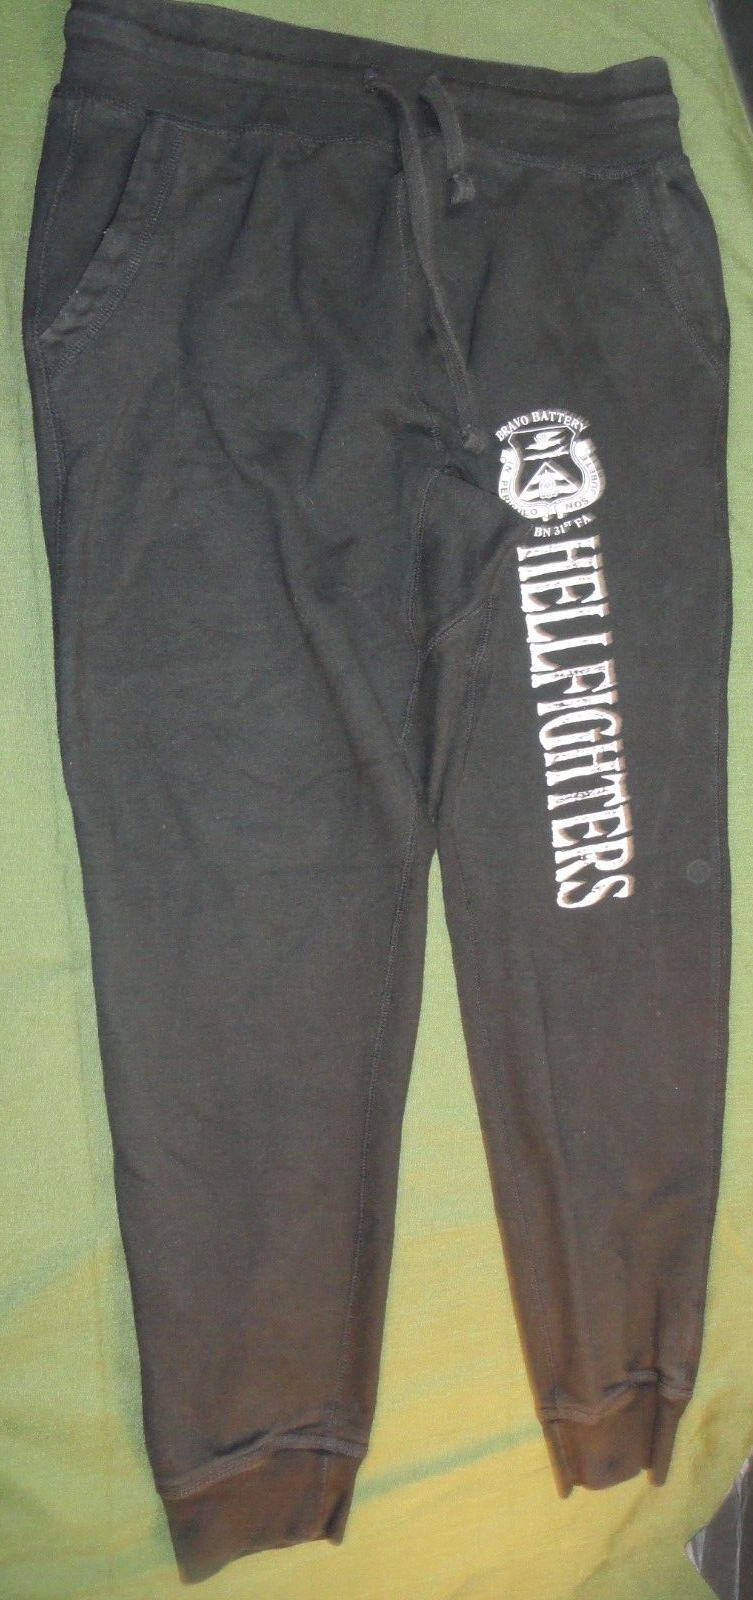 Primary image for DISCONTINUED BRAVO BATTERY 1ST BN 31ST FA HELLFIGHTERS BLACK PANTS SWEATPANTS XL